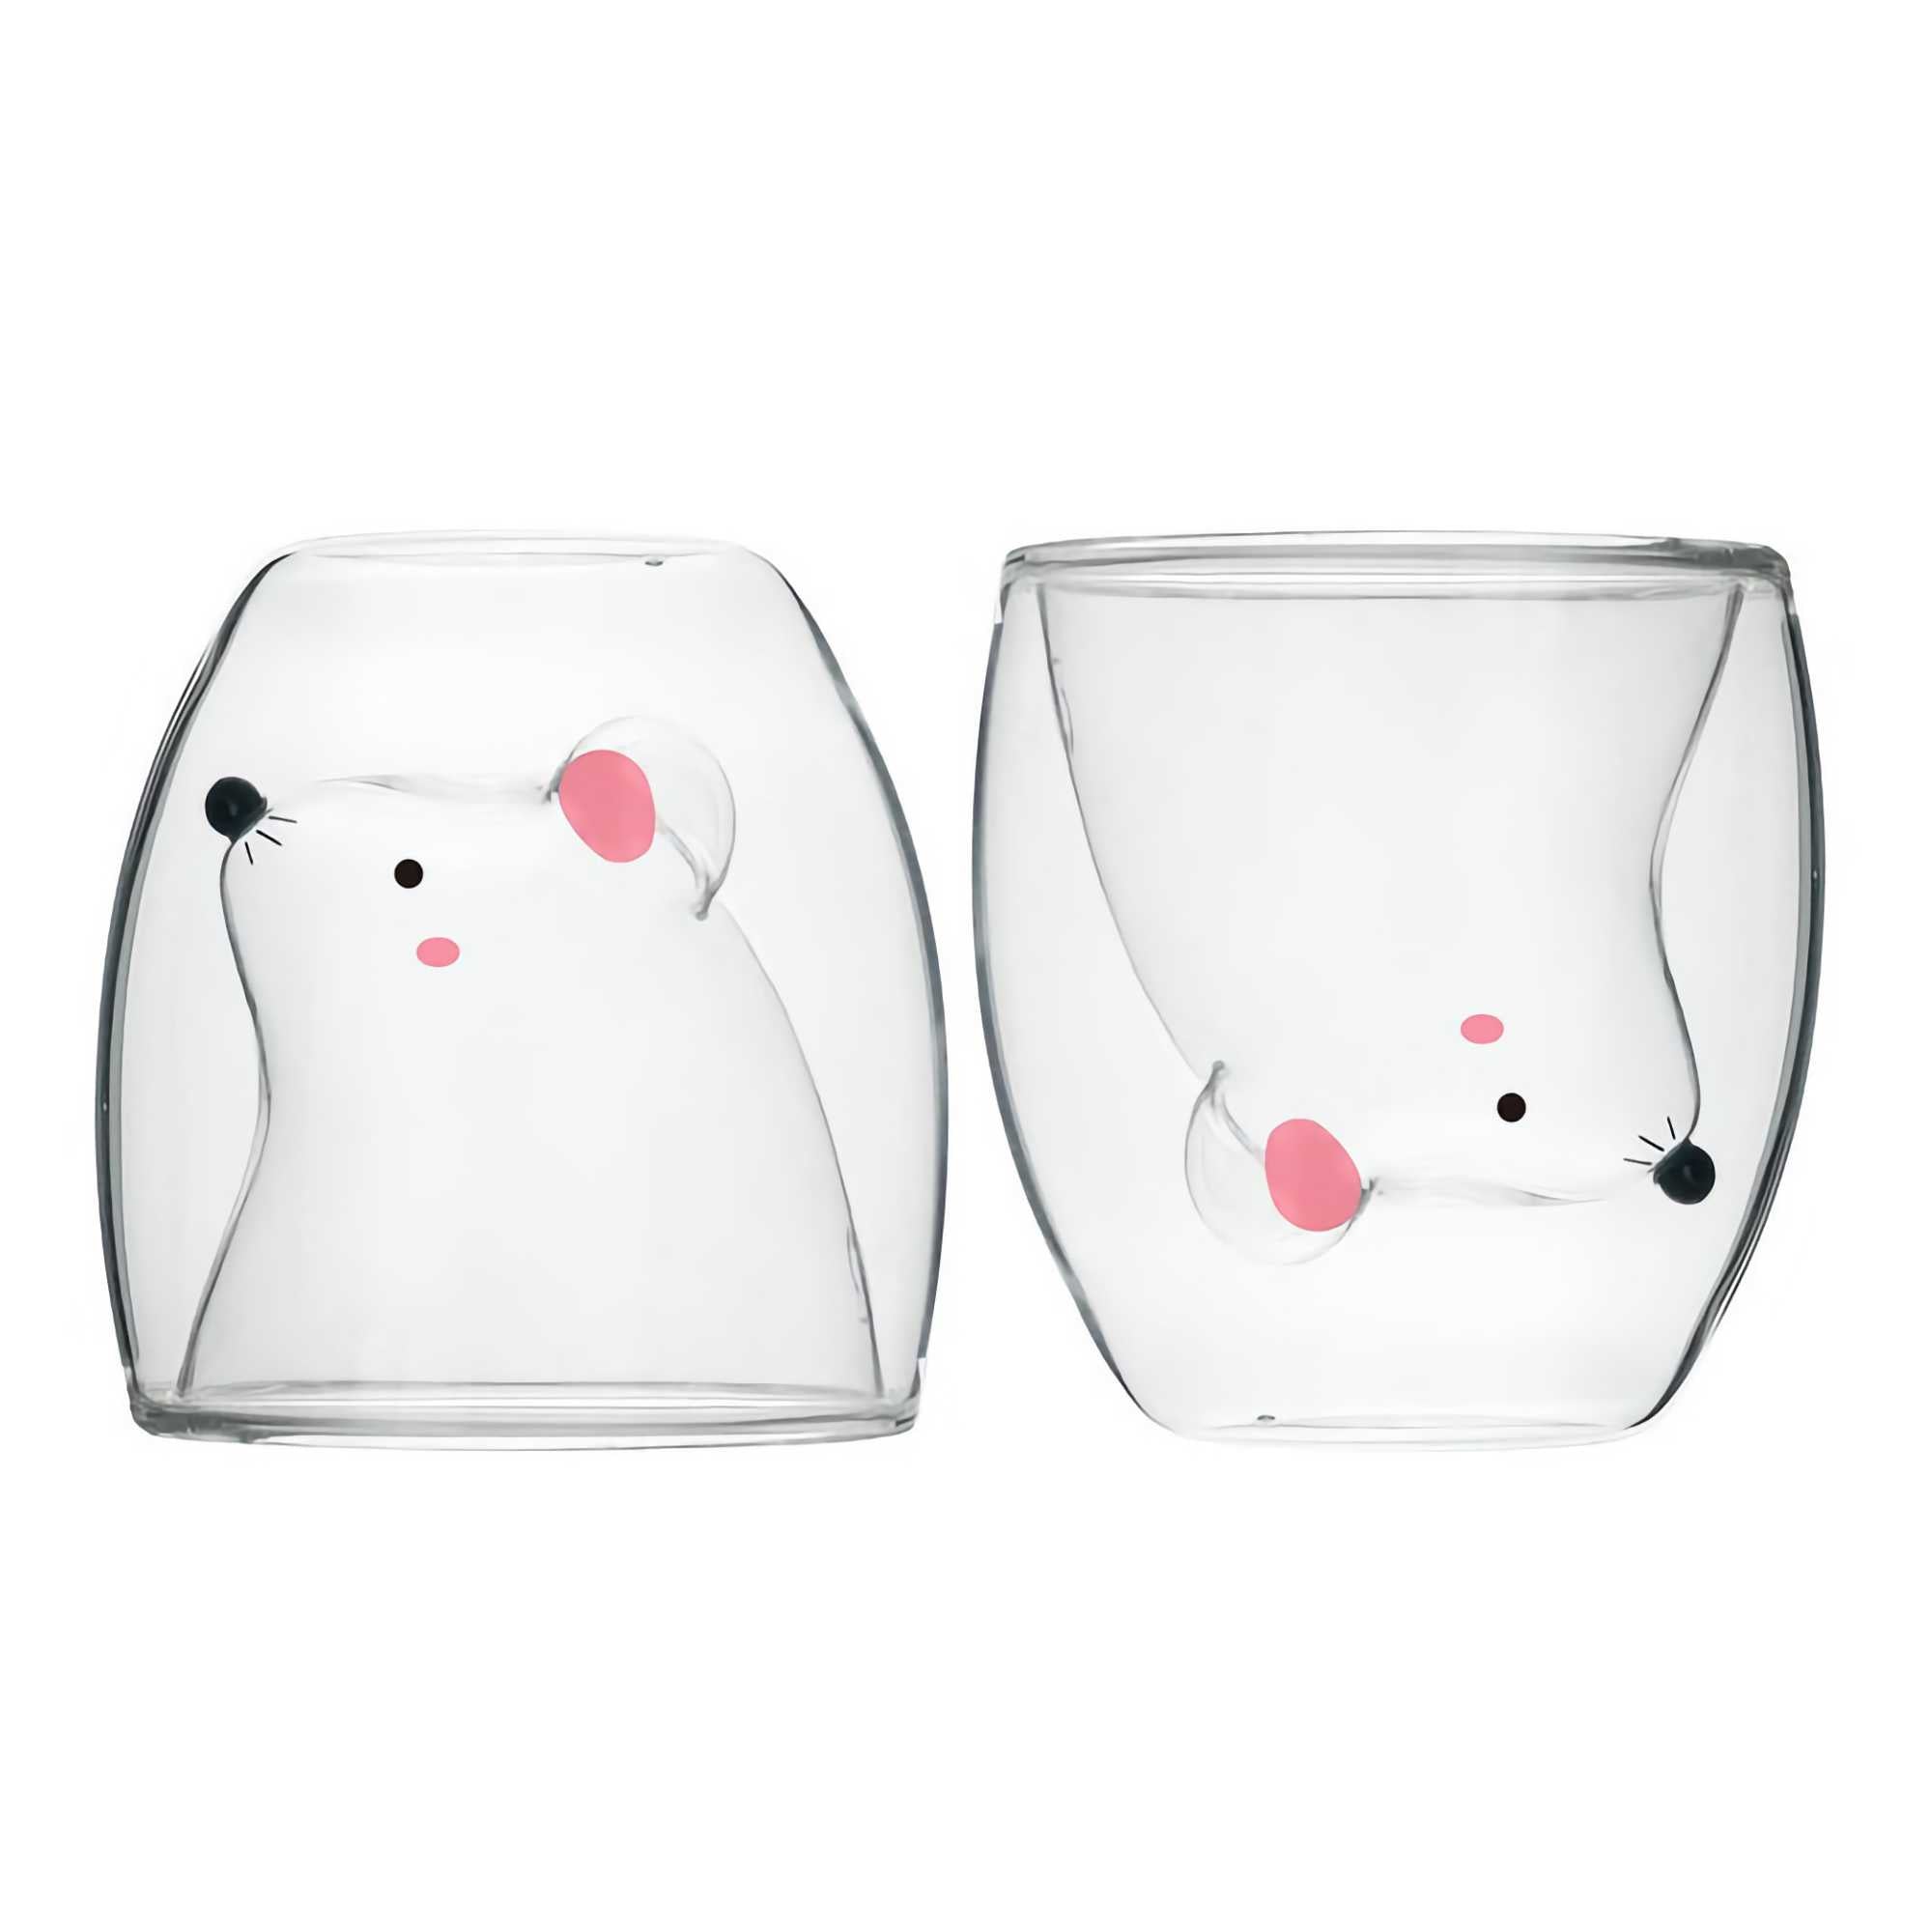 Goodglas double wall glass, mouse